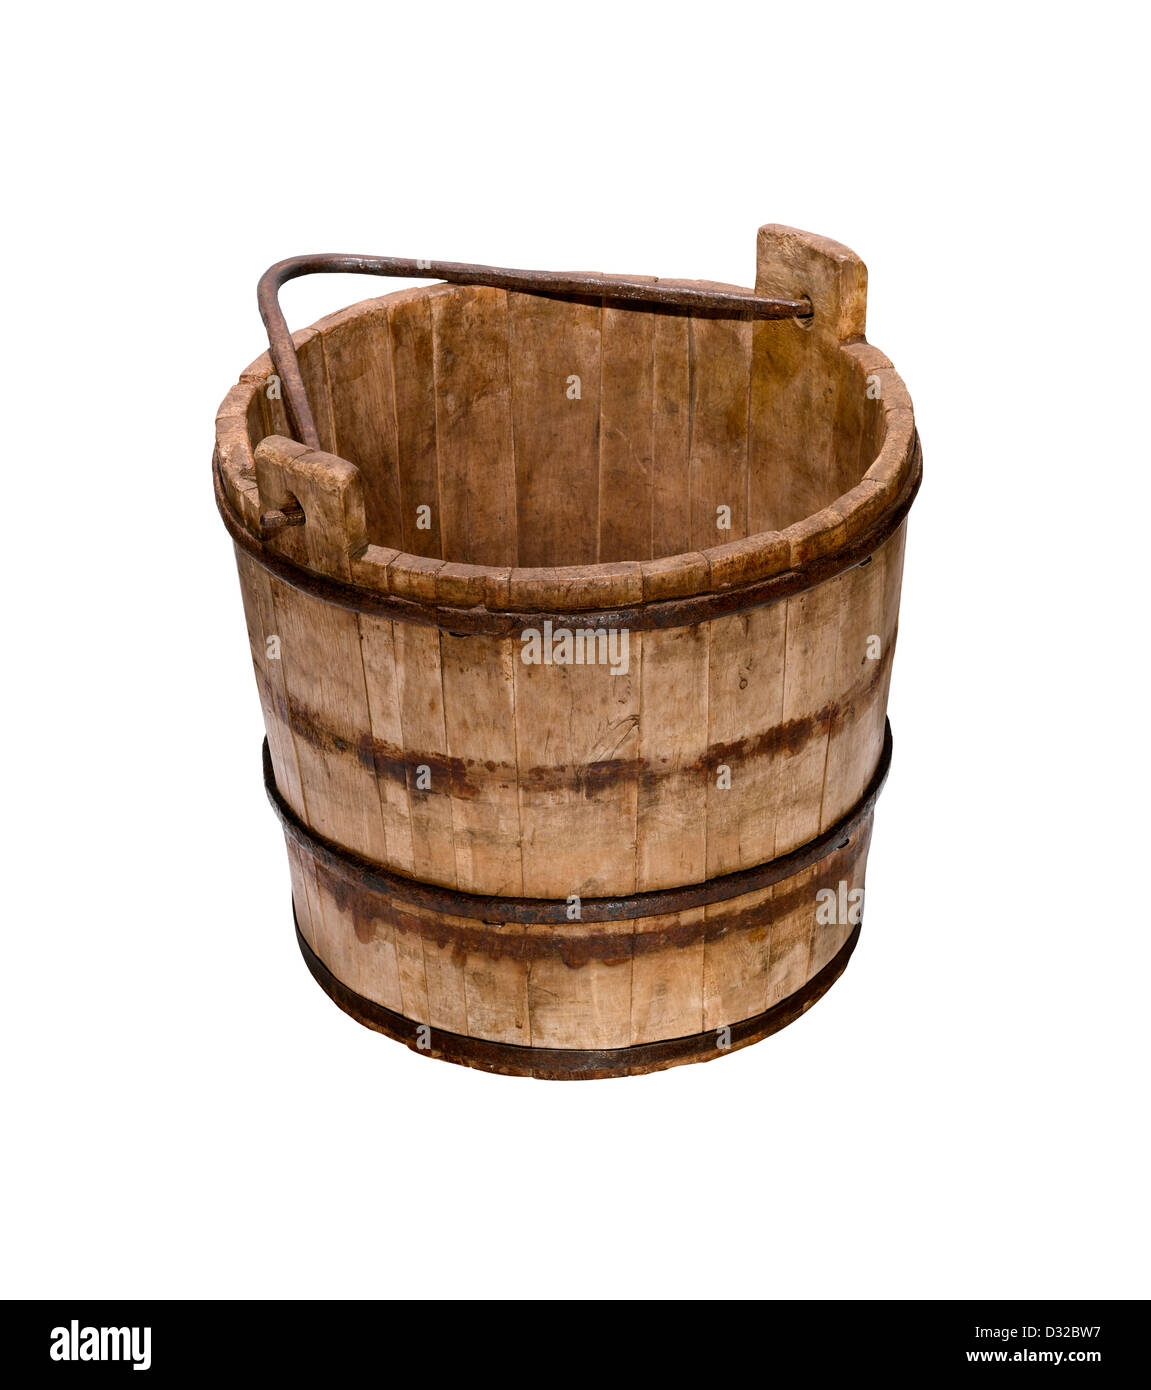 An old fashioned wooden bucket or pail with its handle down Stock Photo